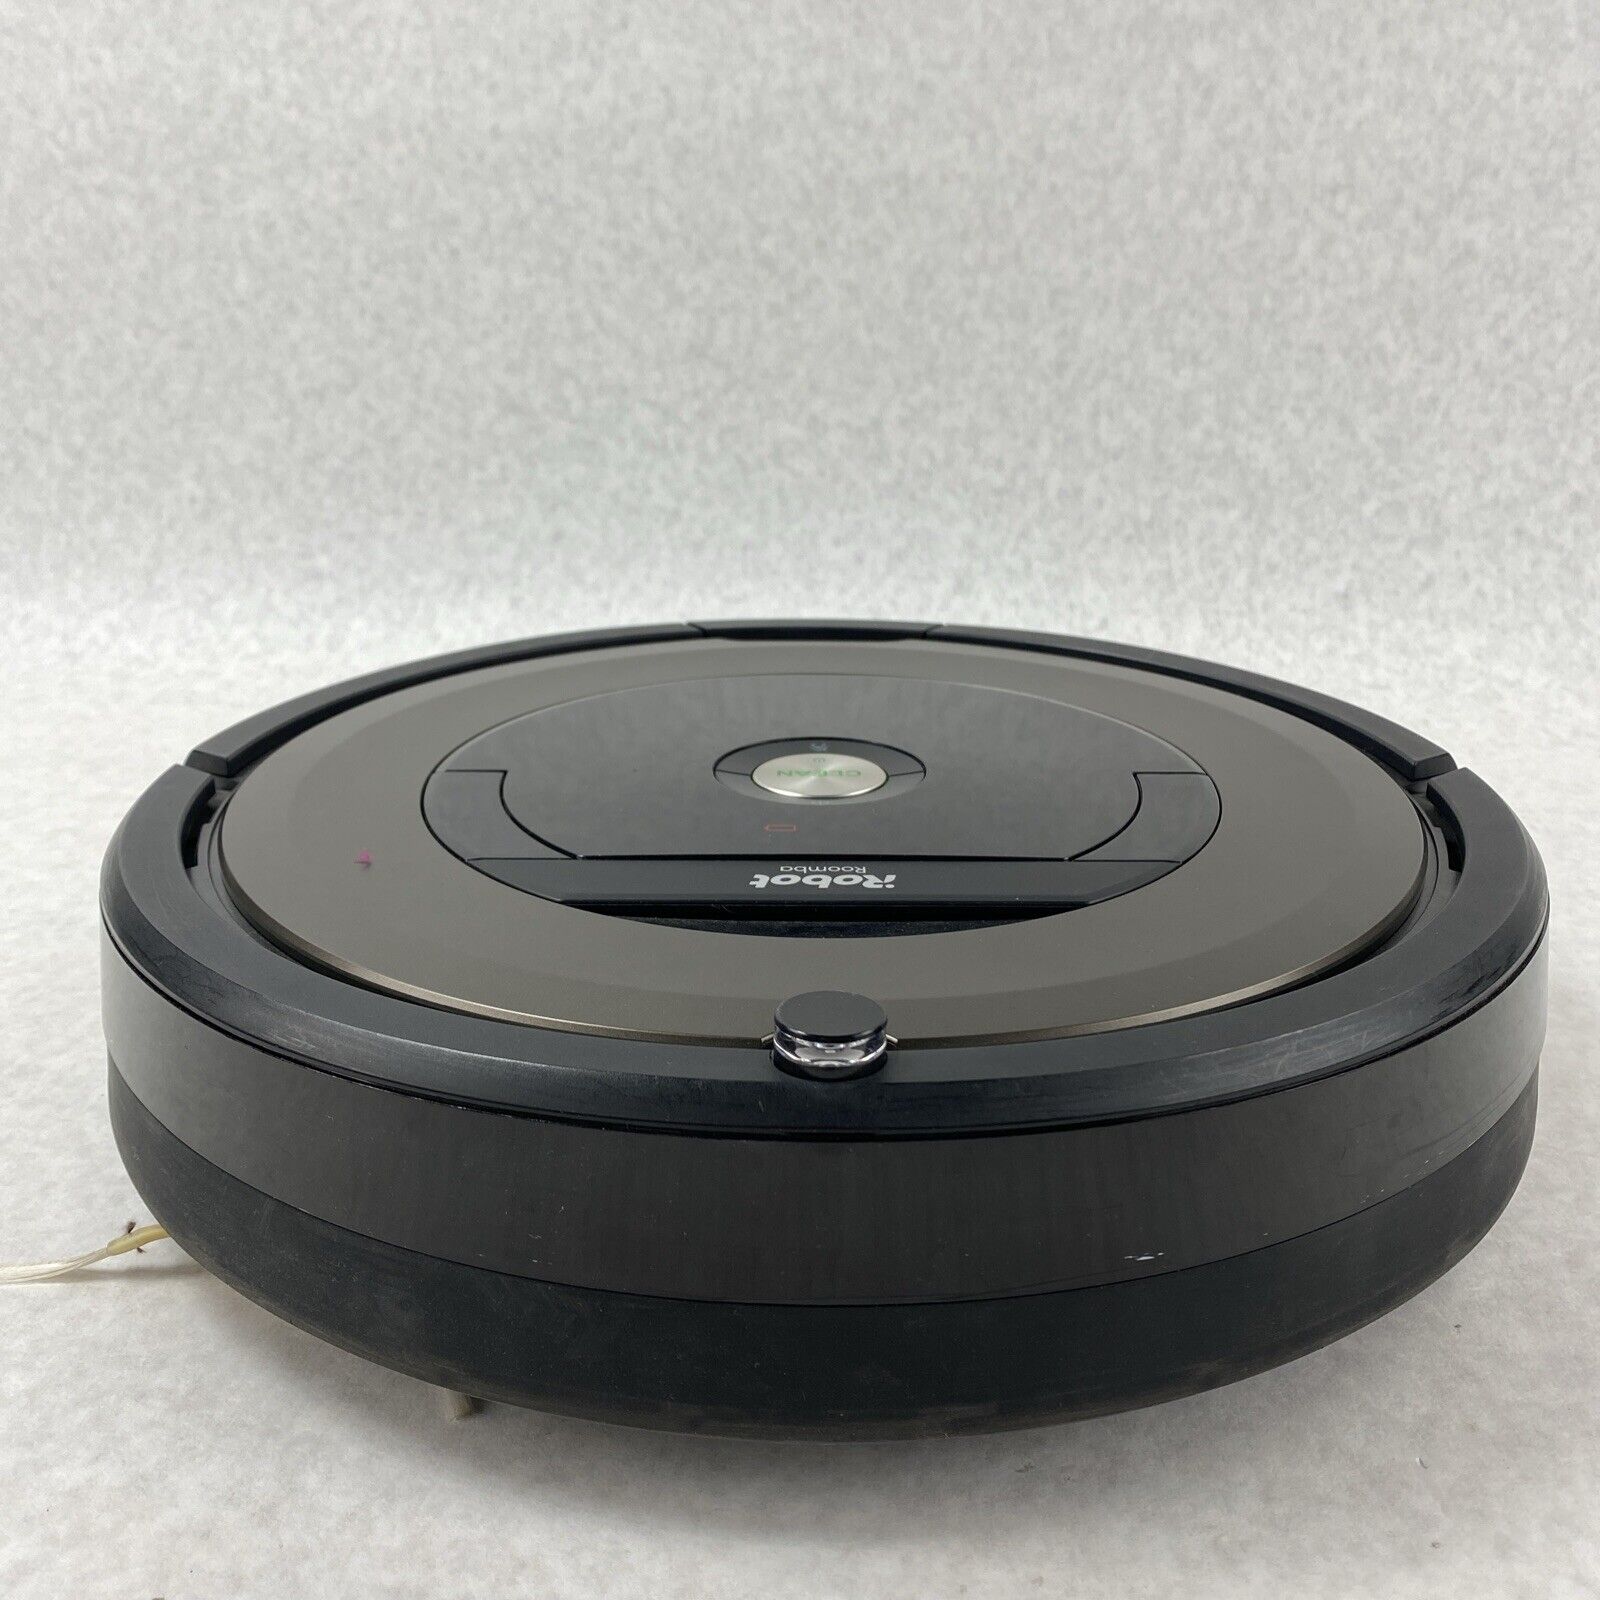 iRobot Roomba 890 Wi-Fi Smart Robot Vacuum Cleaner with Charging Base